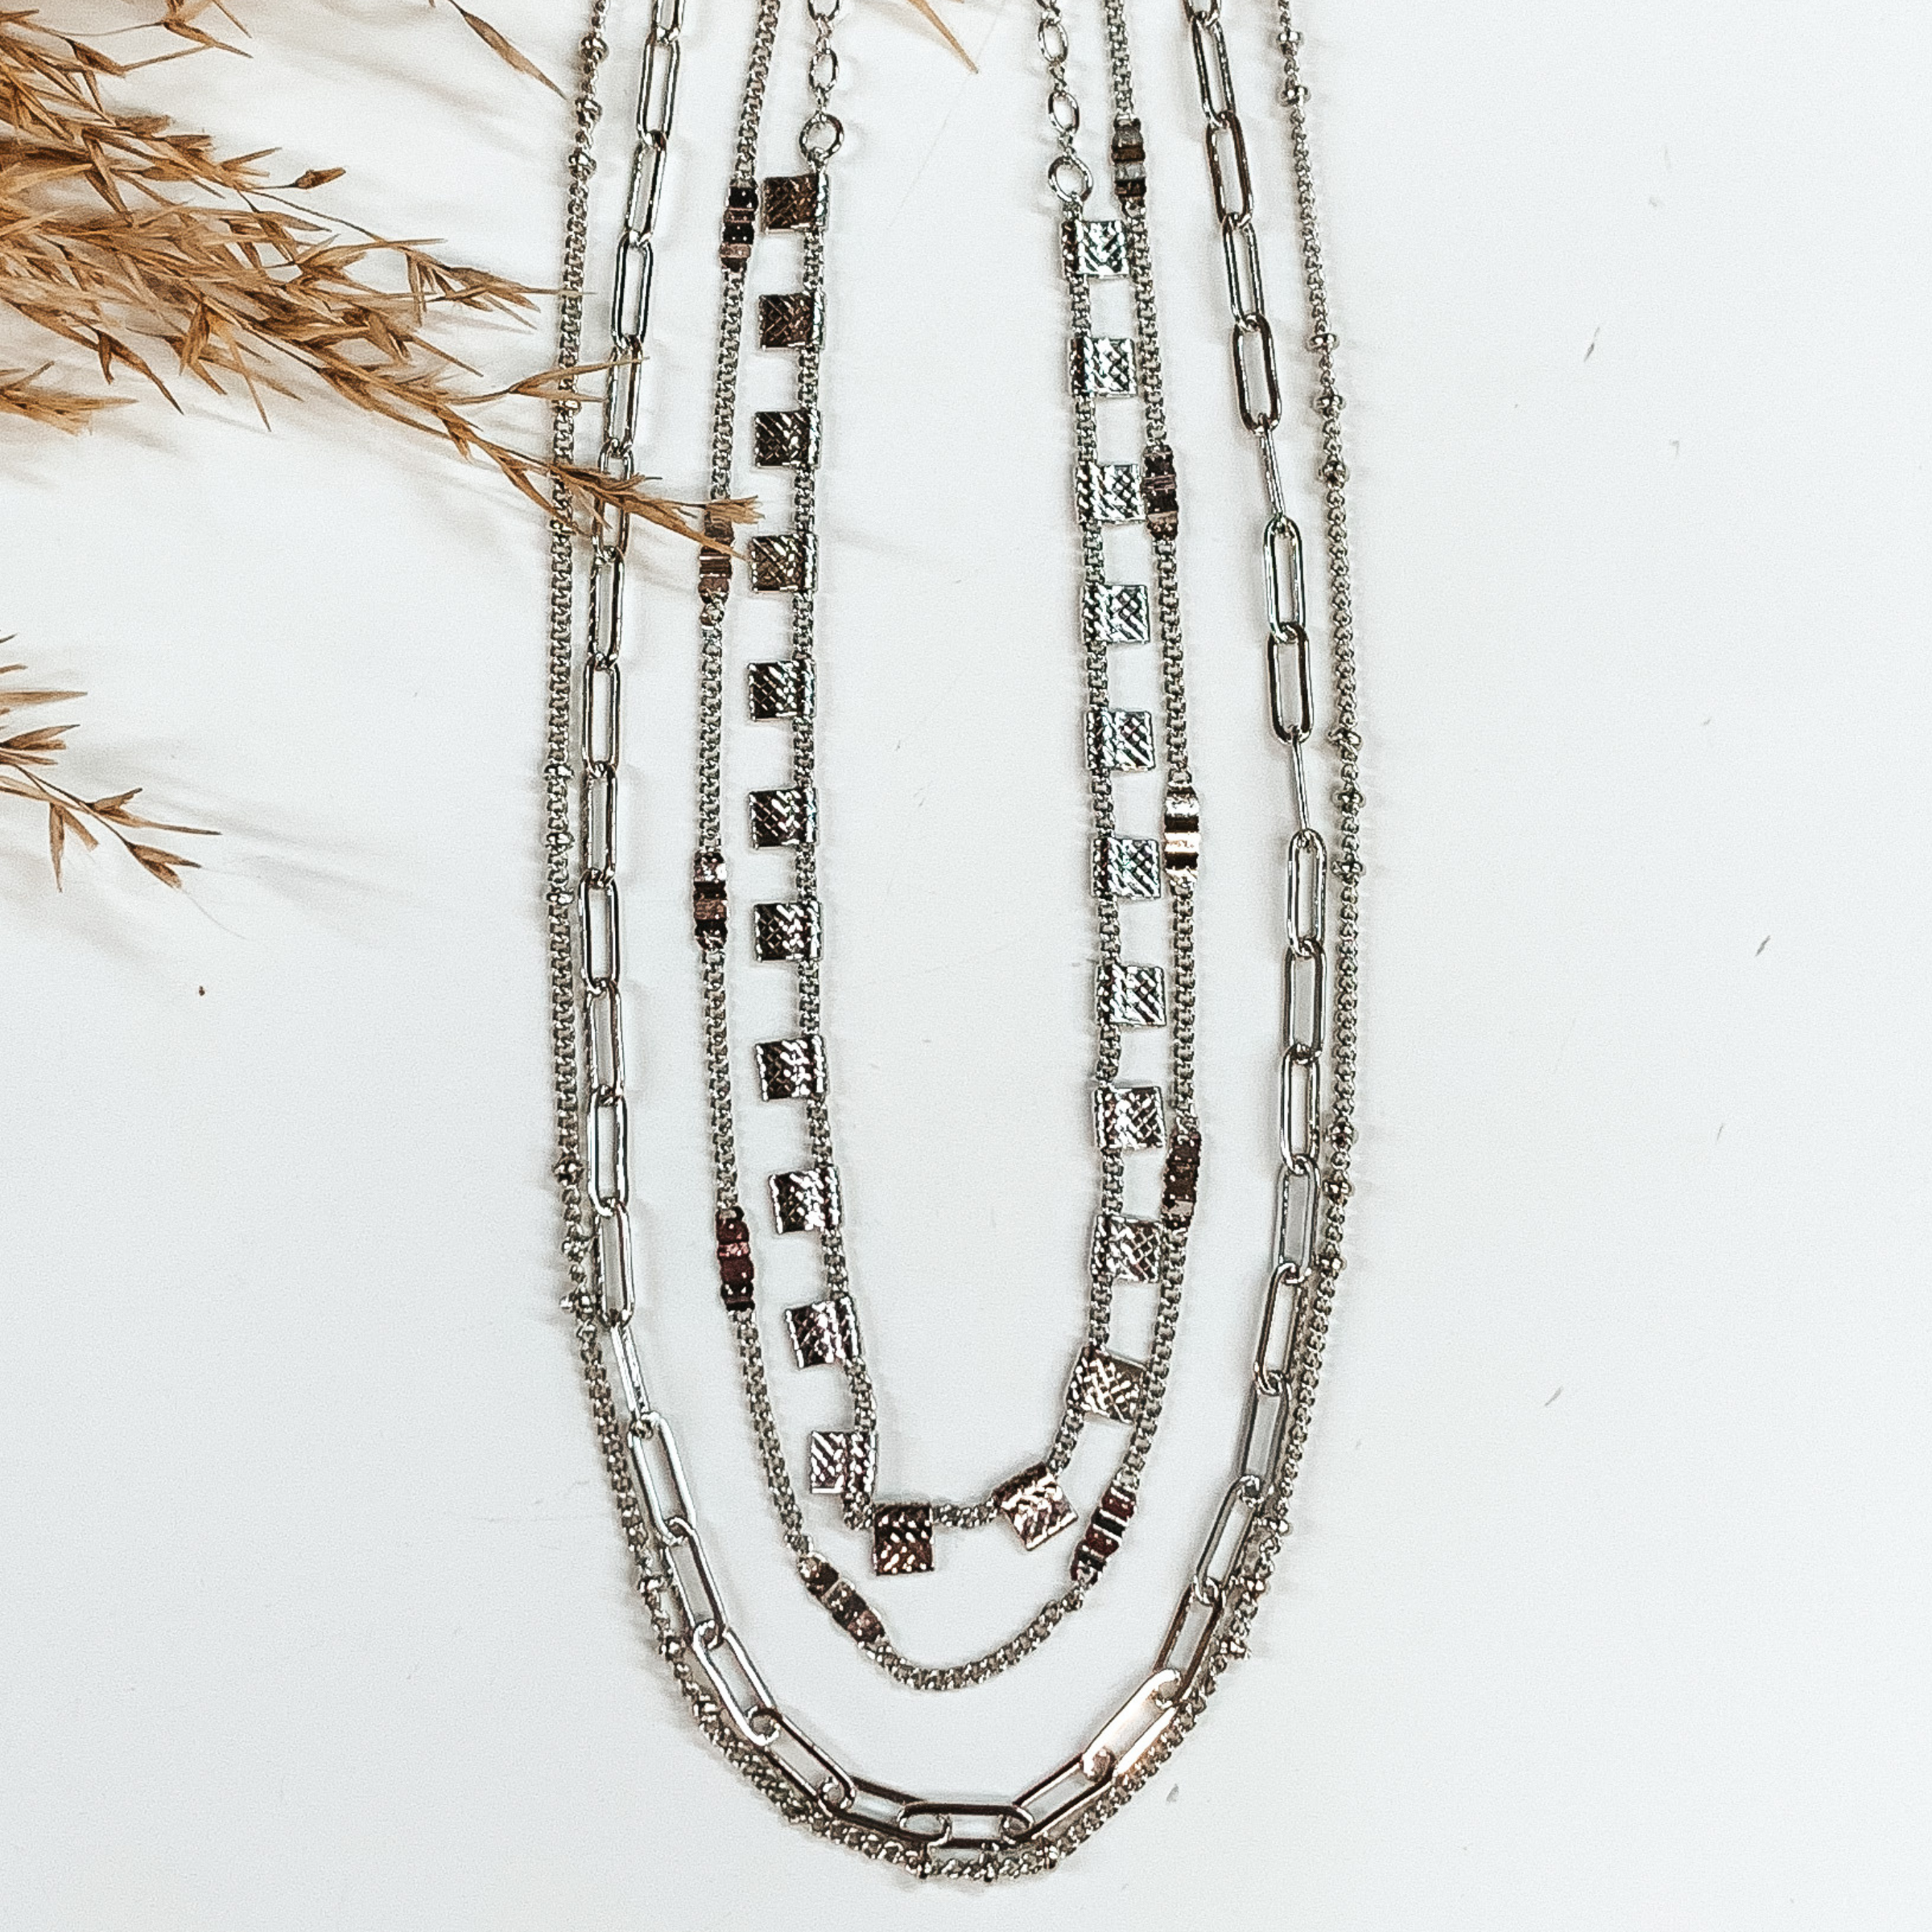 String Me Along Necklace in Silver - Giddy Up Glamour Boutique